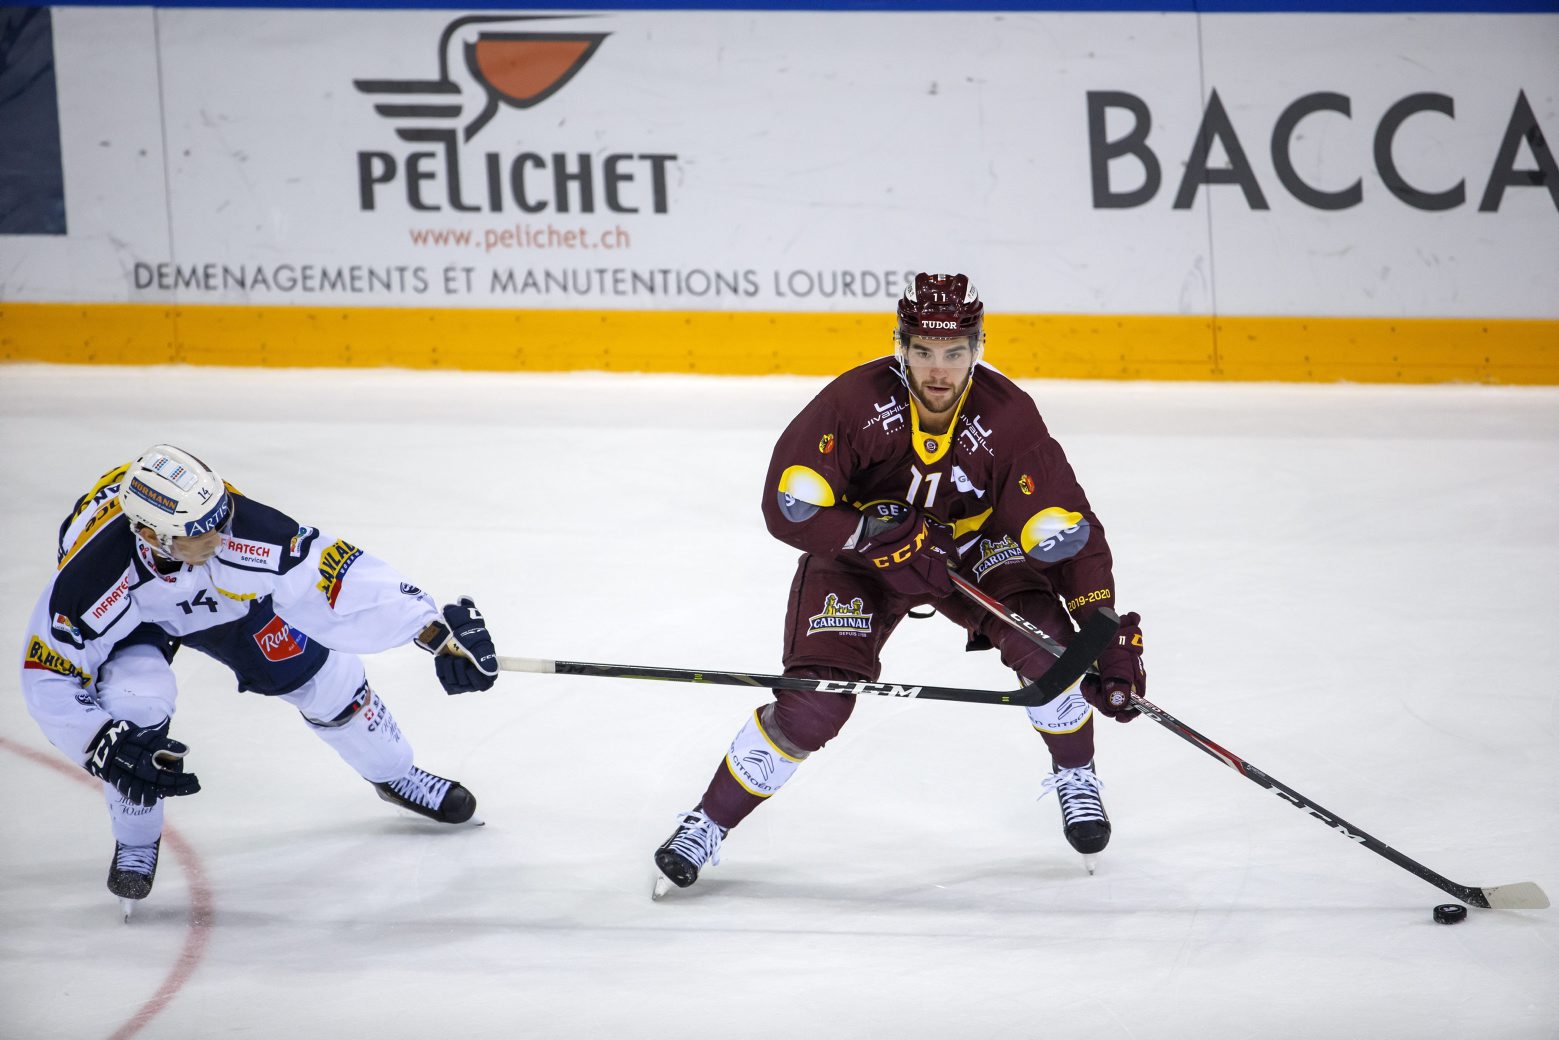 Ambri-Piotta's center Giacomo Dal Pian, left, vies for the puck with Geneve-Servette's forward Guillaume Maillard, right, during a National League regular season game of the Swiss Championship between Geneve-Servette HC and HC Ambri-Piotta, at the ice stadium Les Vernets, in Geneva, Switzerland, Friday, October 25, 2019. (KEYSTONE/Salvatore Di Nolfi) SWITZERLAND ICE HOCKEY SERVETTE AMBRI